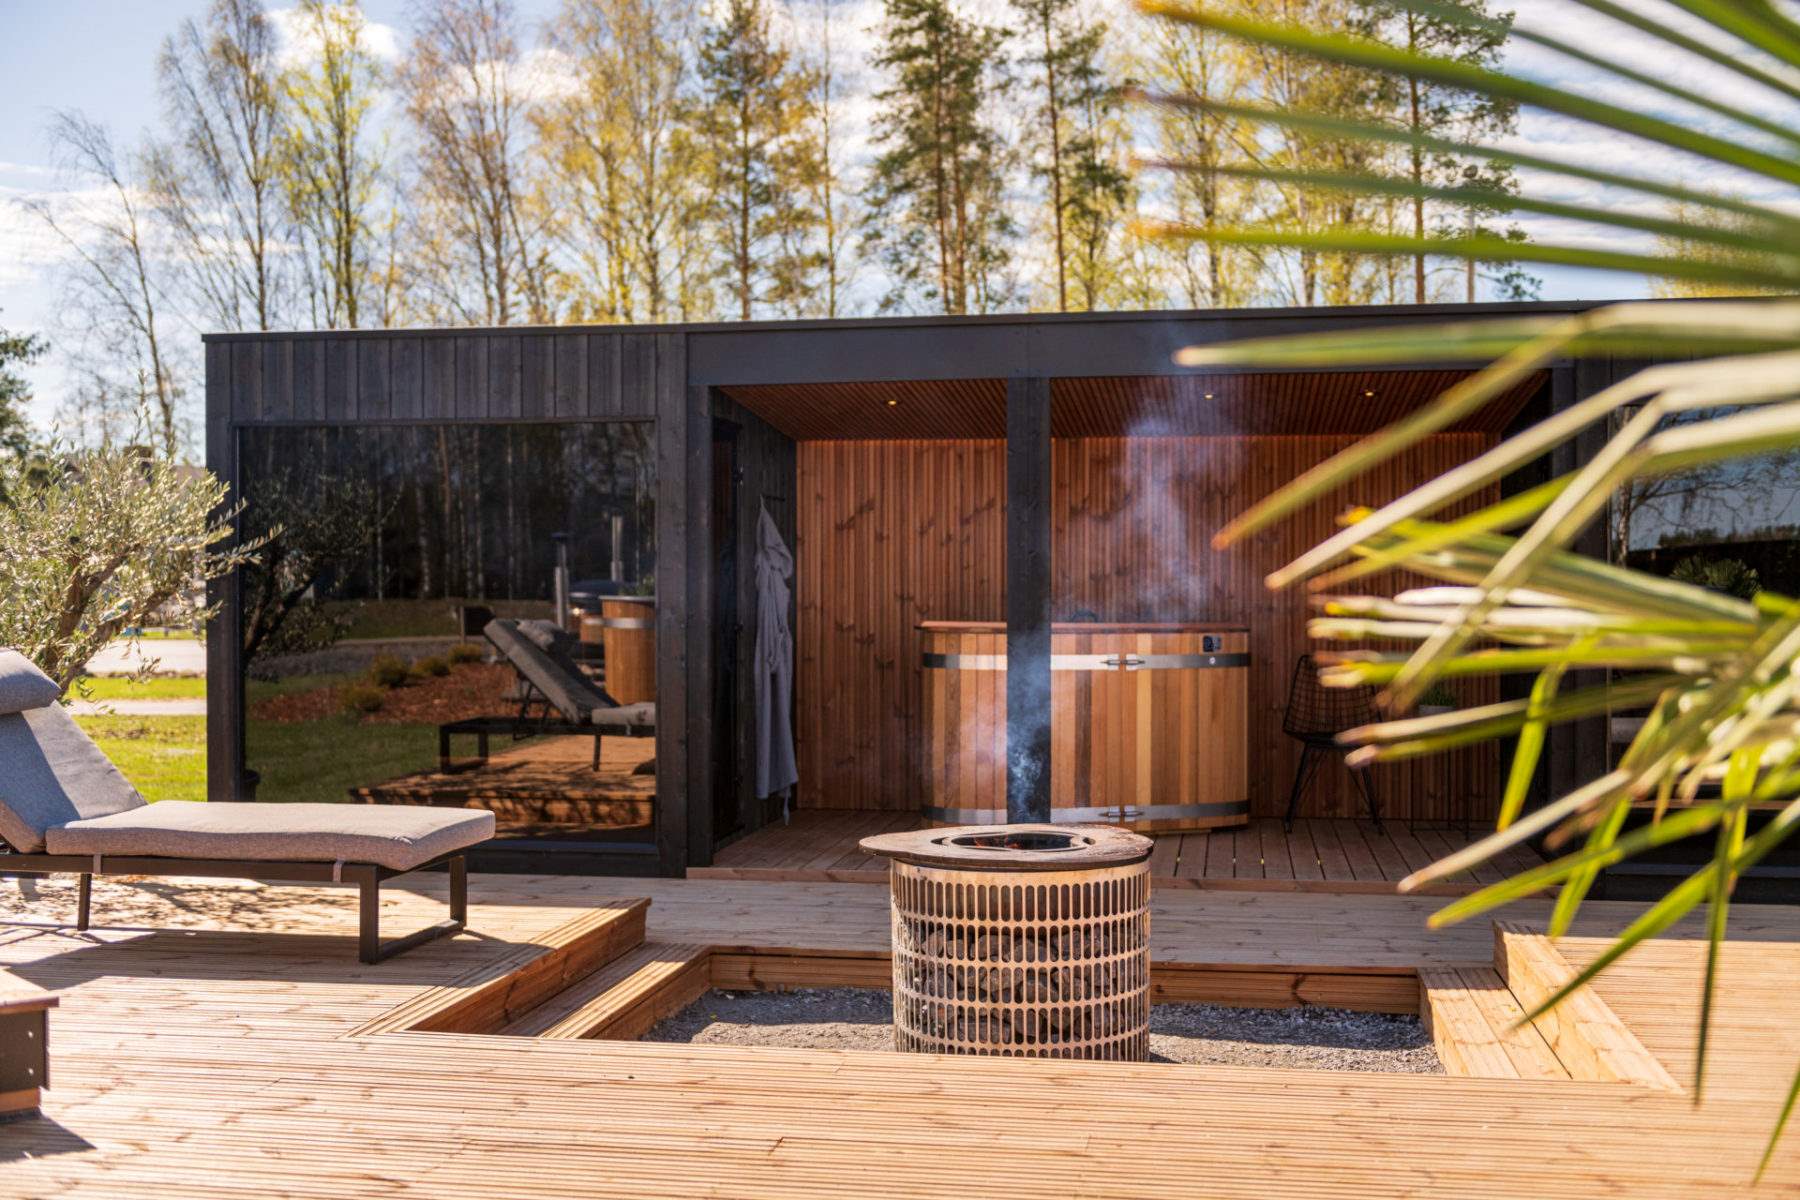 How To Build A Sauna In Your Backyard